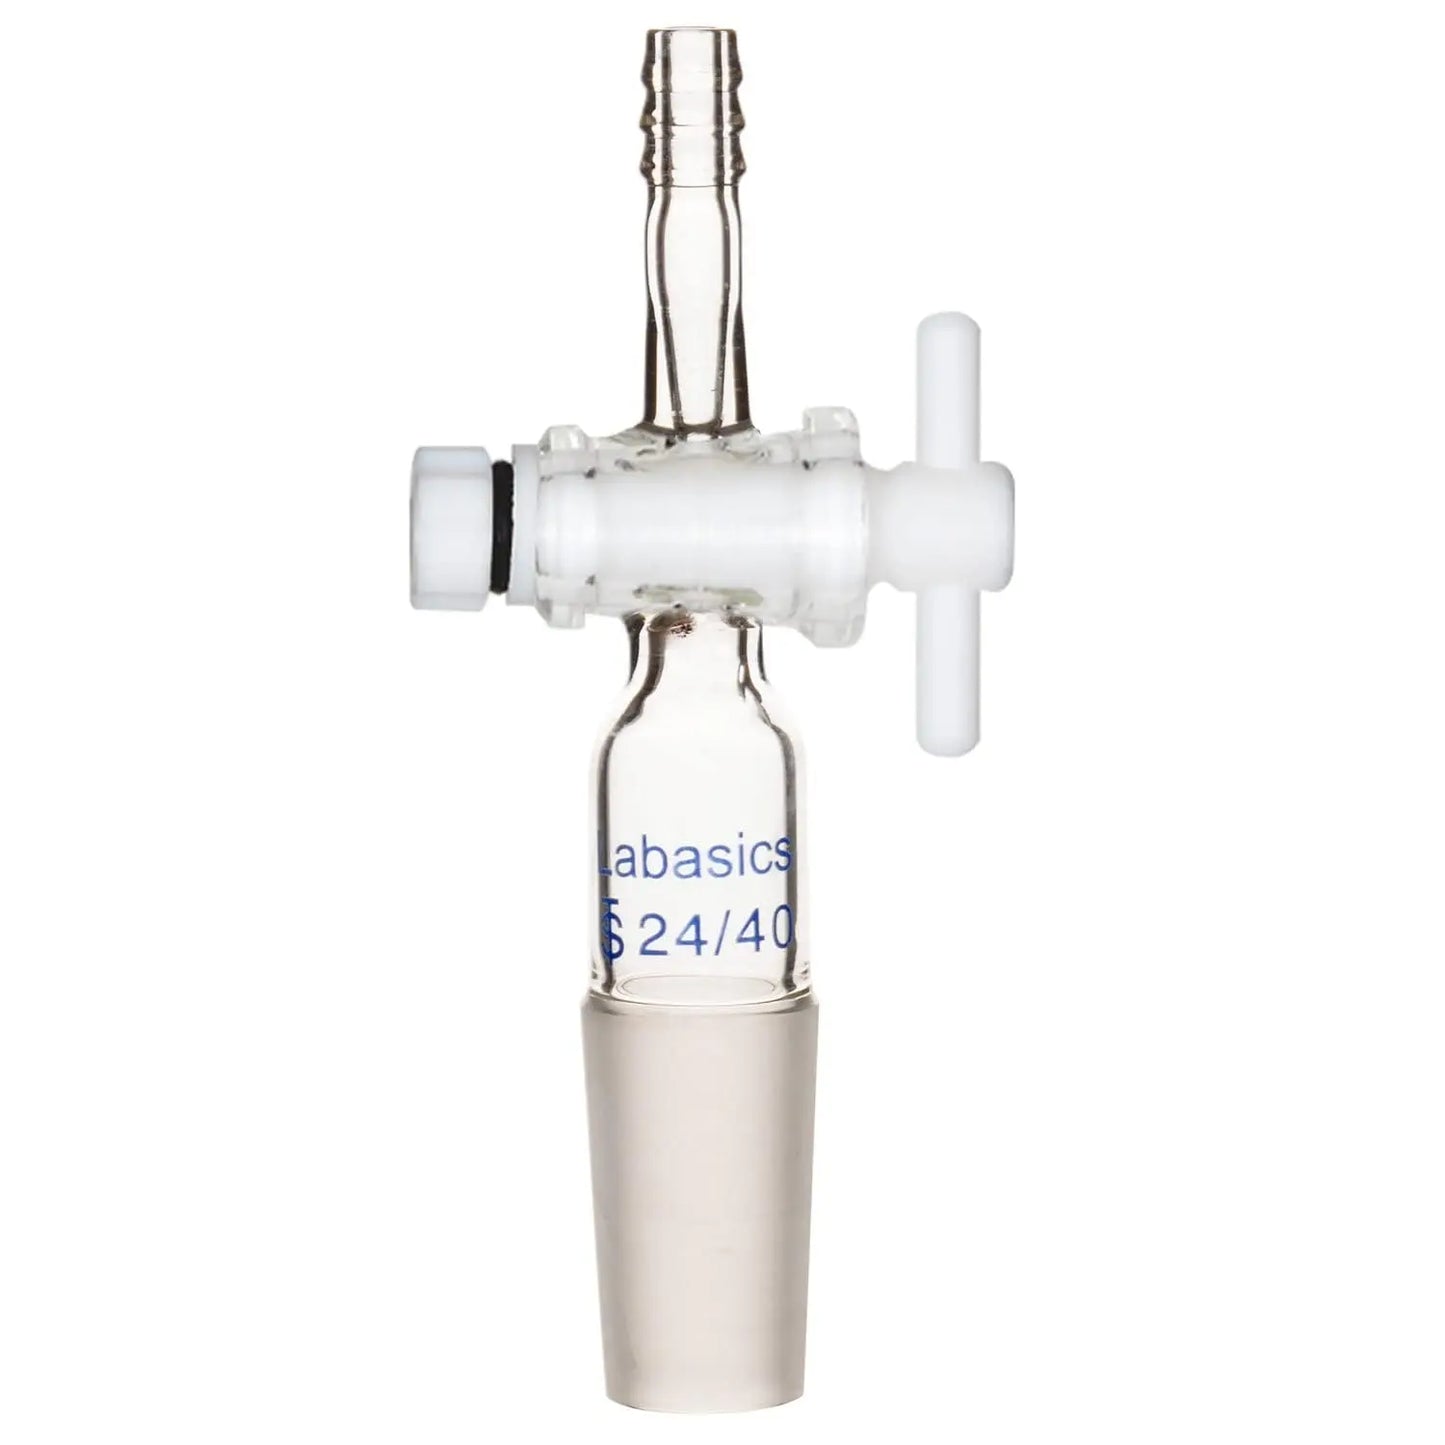 Vacuum Flow Control Adapter with PTFE Stopcock, 24/40 Joint and Straight Hose Connection for Lab Supply